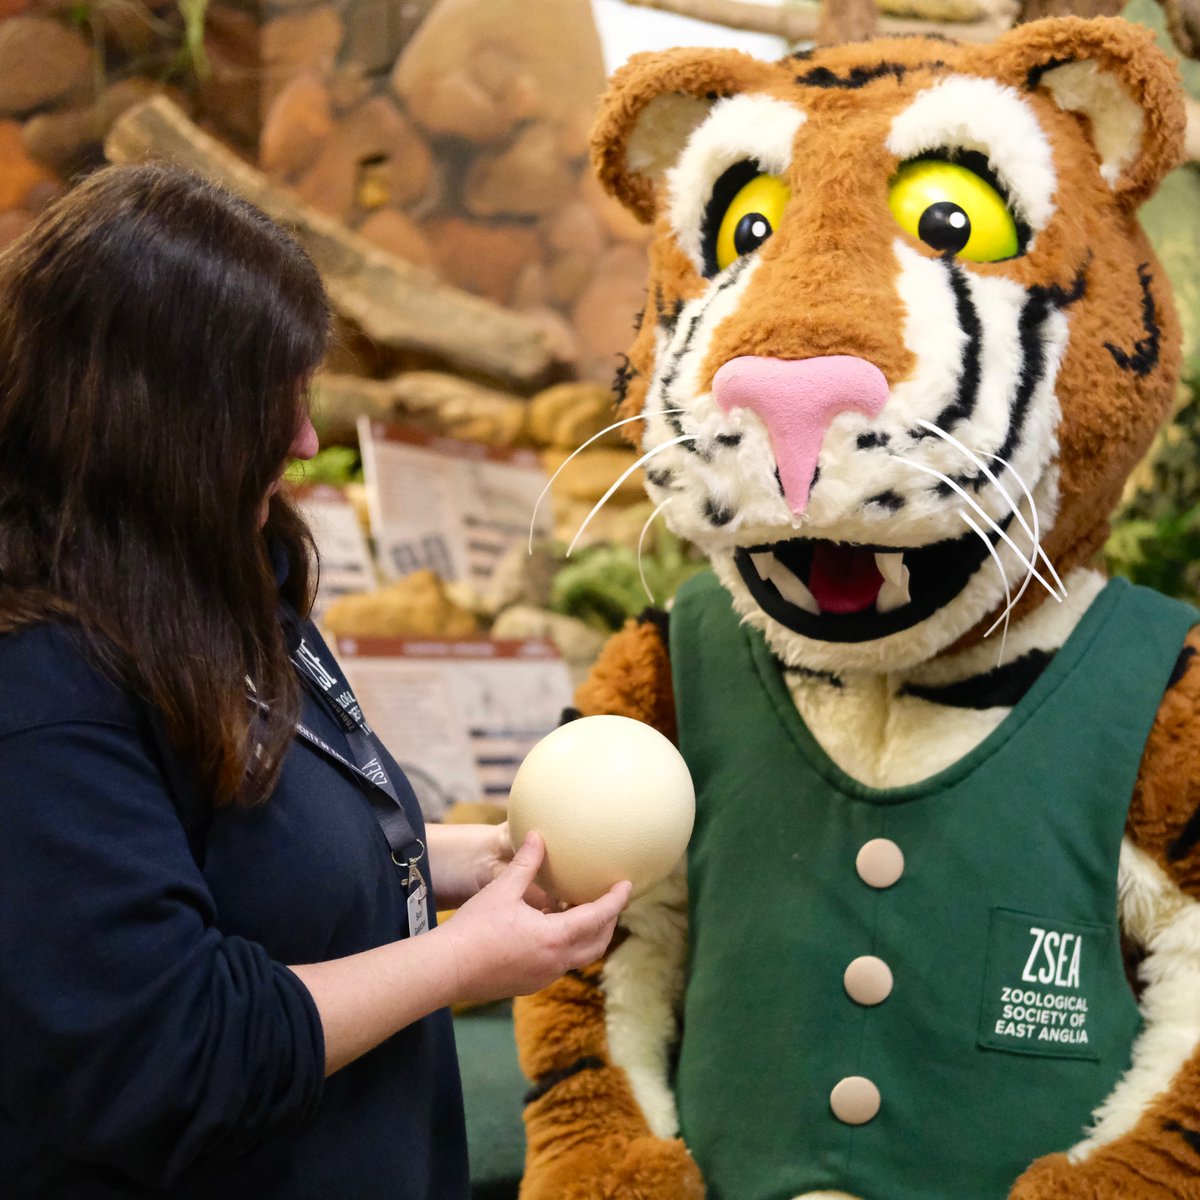 There's still time to catch 'Reggie Presents: The Amazing World of Eggs' this Easter 🥚 Join our Education Team and help Reggie identify our mysterious egg! The show runs twice daily at 11:30am and 1:30pm, and you might even have the chance to meet Reggie too!